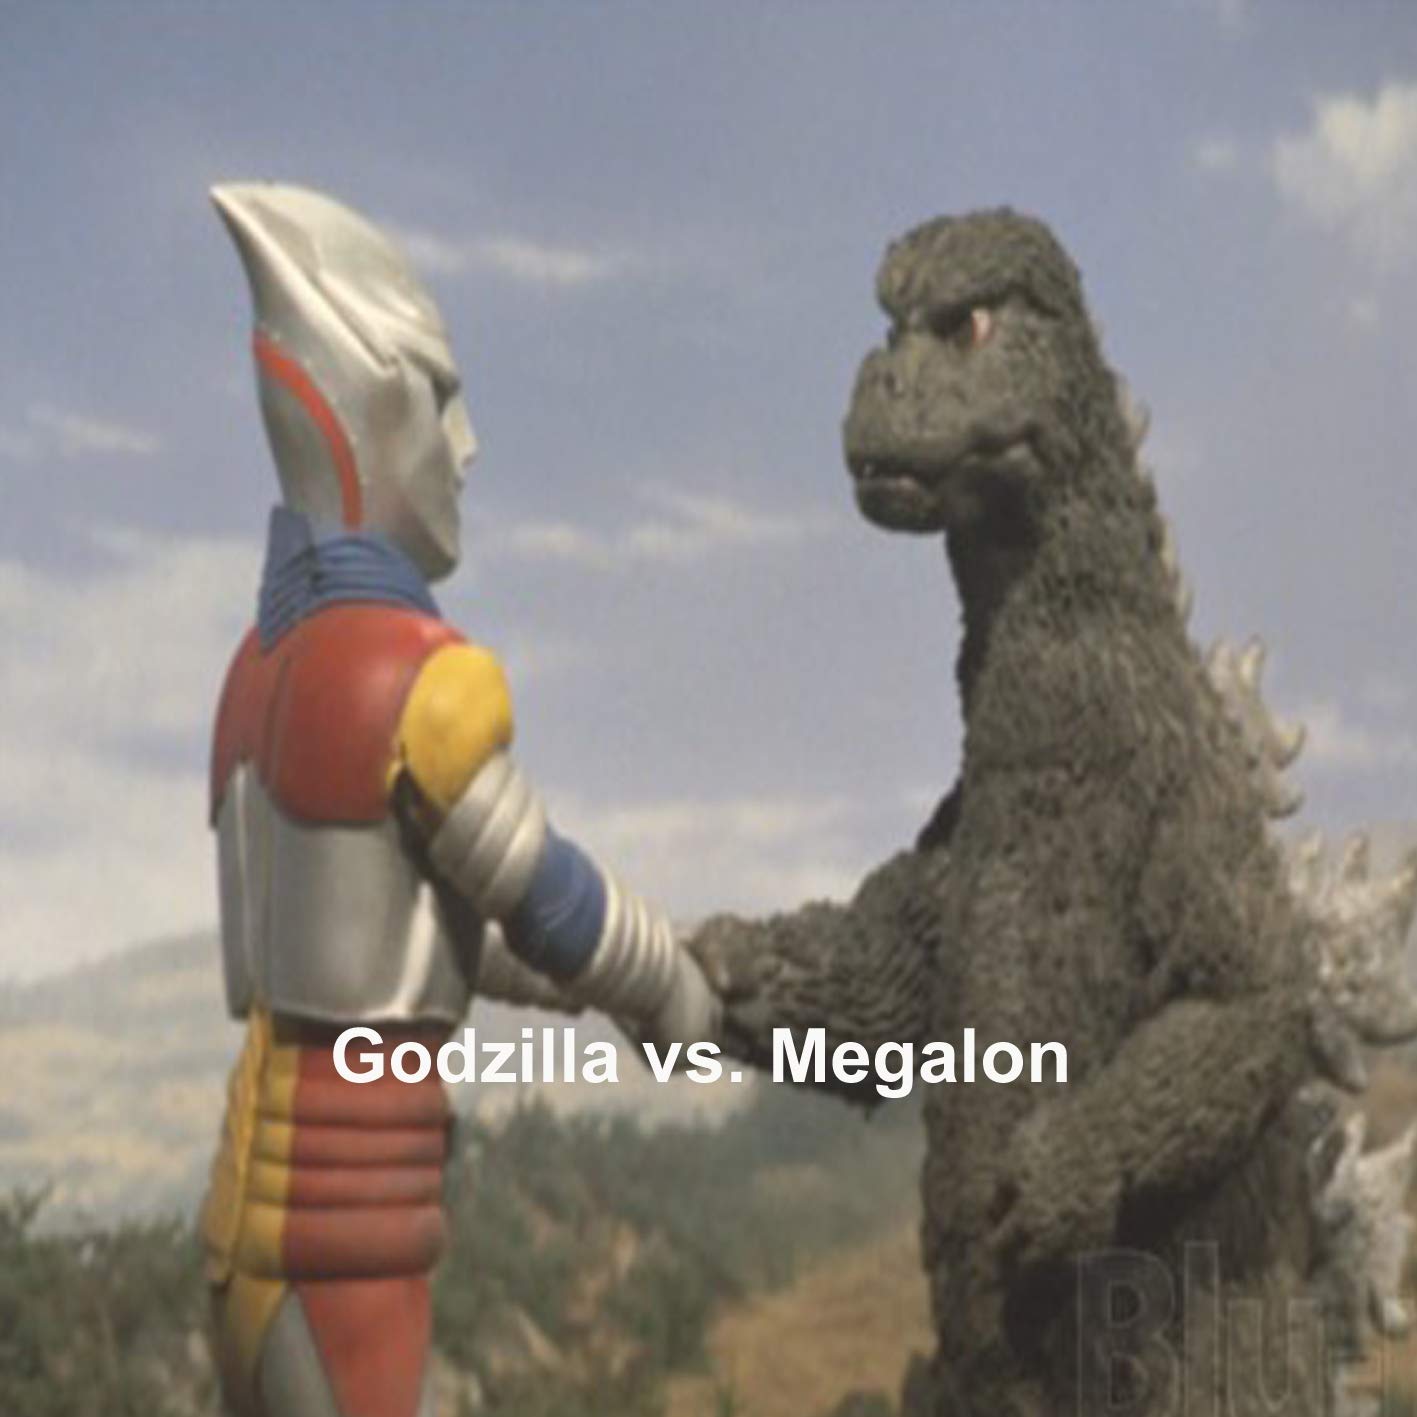 In Godzilla vs. Megalon, the angry Seatopians send their secret weapon Megalon to destroy Tokyo and eliminate the human race. But Earth still has a chance when the sleeping Godzilla is rudely awakened.